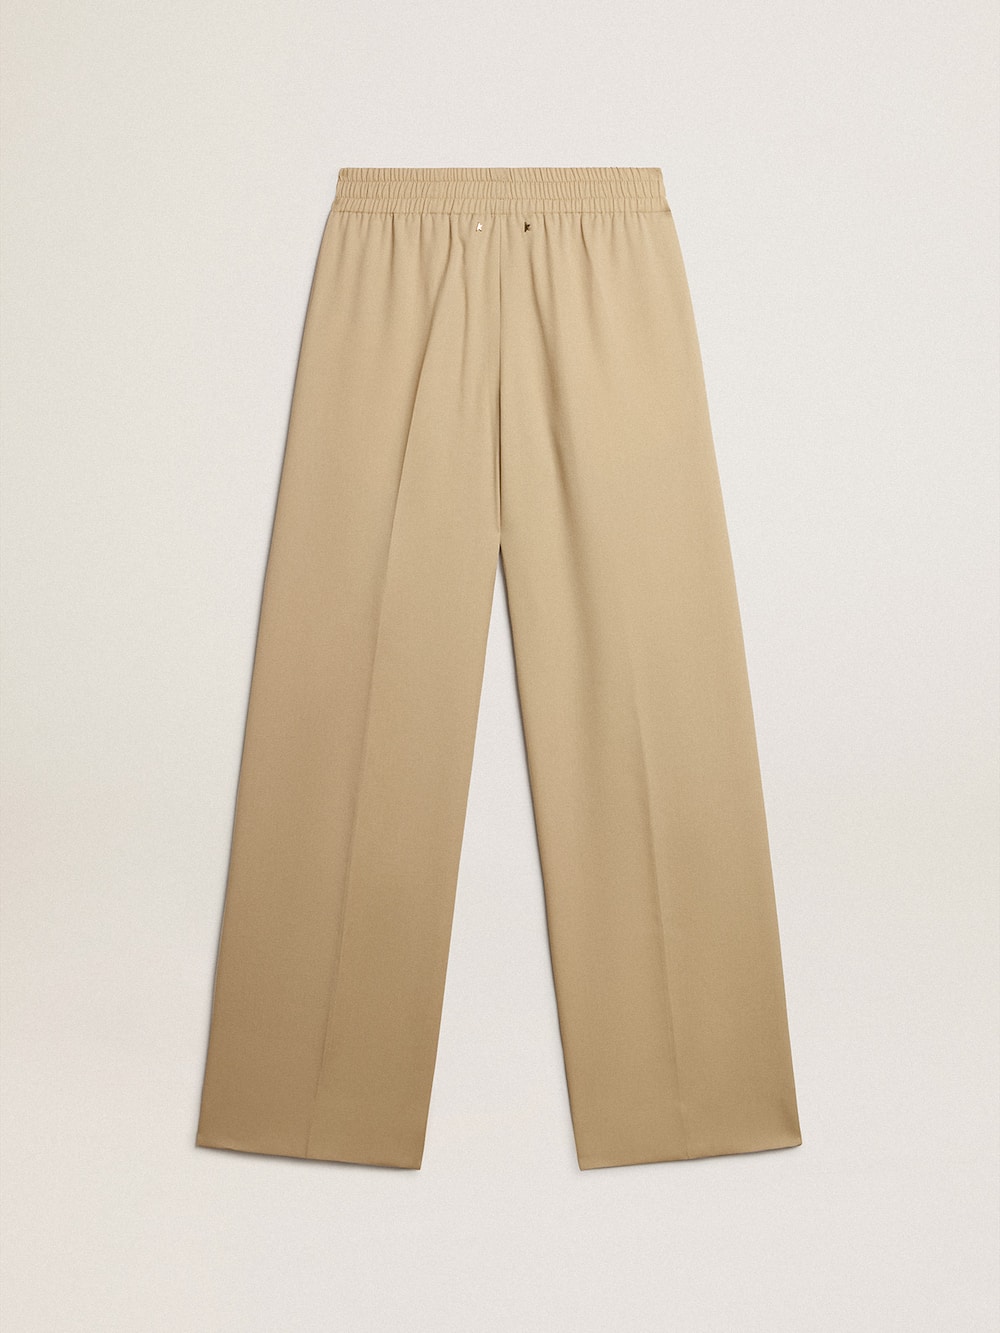 Golden Goose - Women’s sand-colored joggers in 